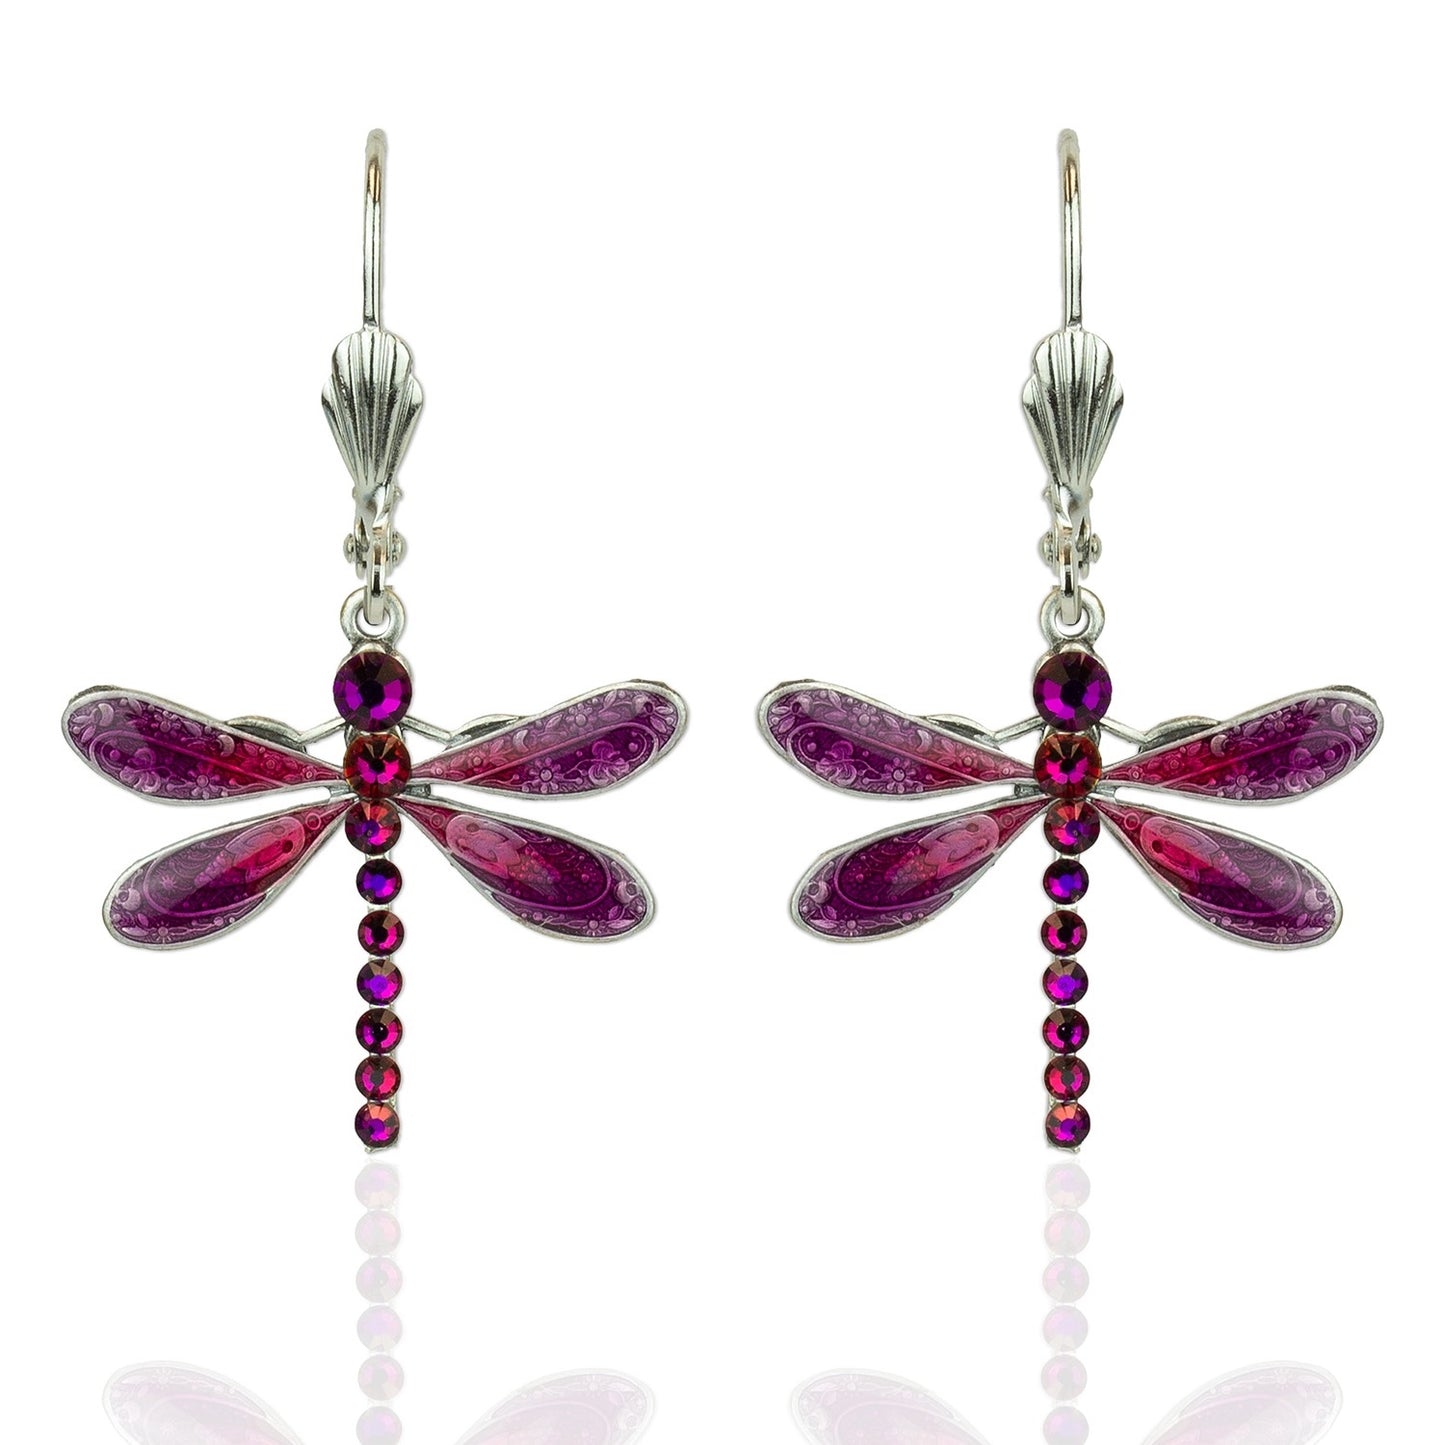 Radiance Dragonfly Earrings